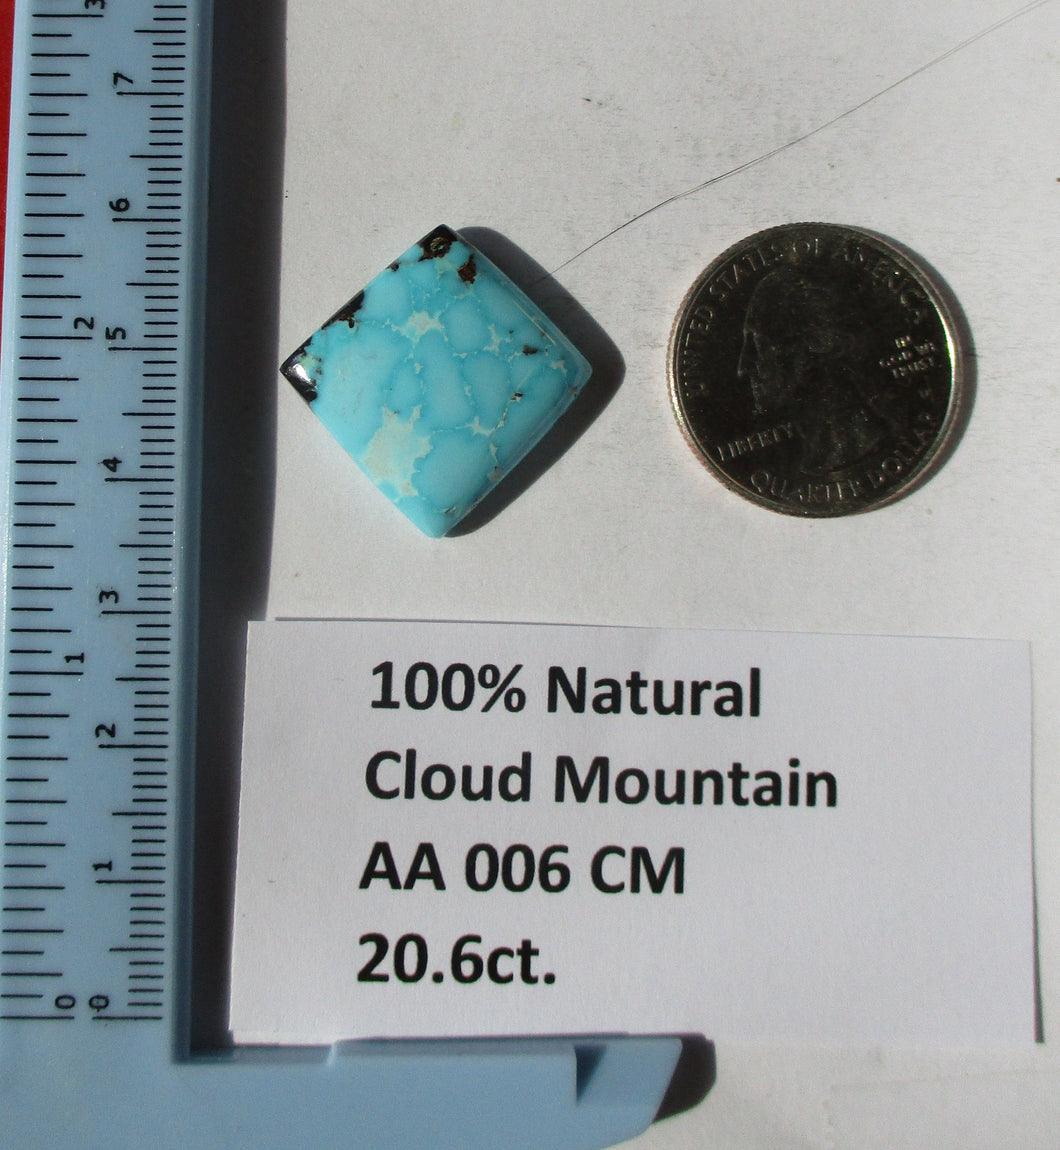 20.6 ct. (19x19x5.5 (sides) 25x25 (tip-tip) mm) 100% Natural Web Cloud Mountain Turquoise  Cabochon, Gemstone, # AA 006